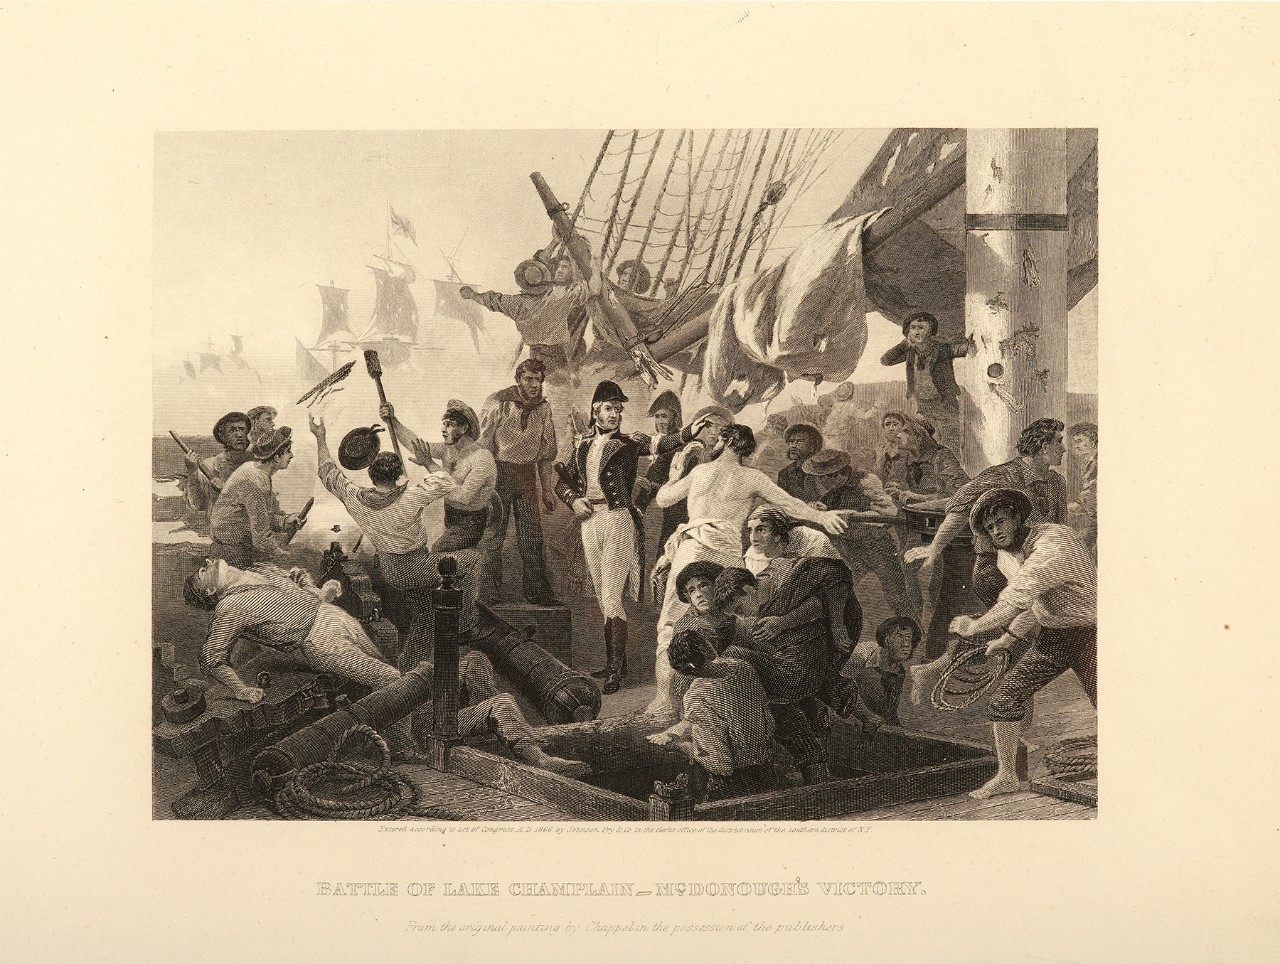 Macdonough stands calmly on the deck of a ship while the men around him fight furiously